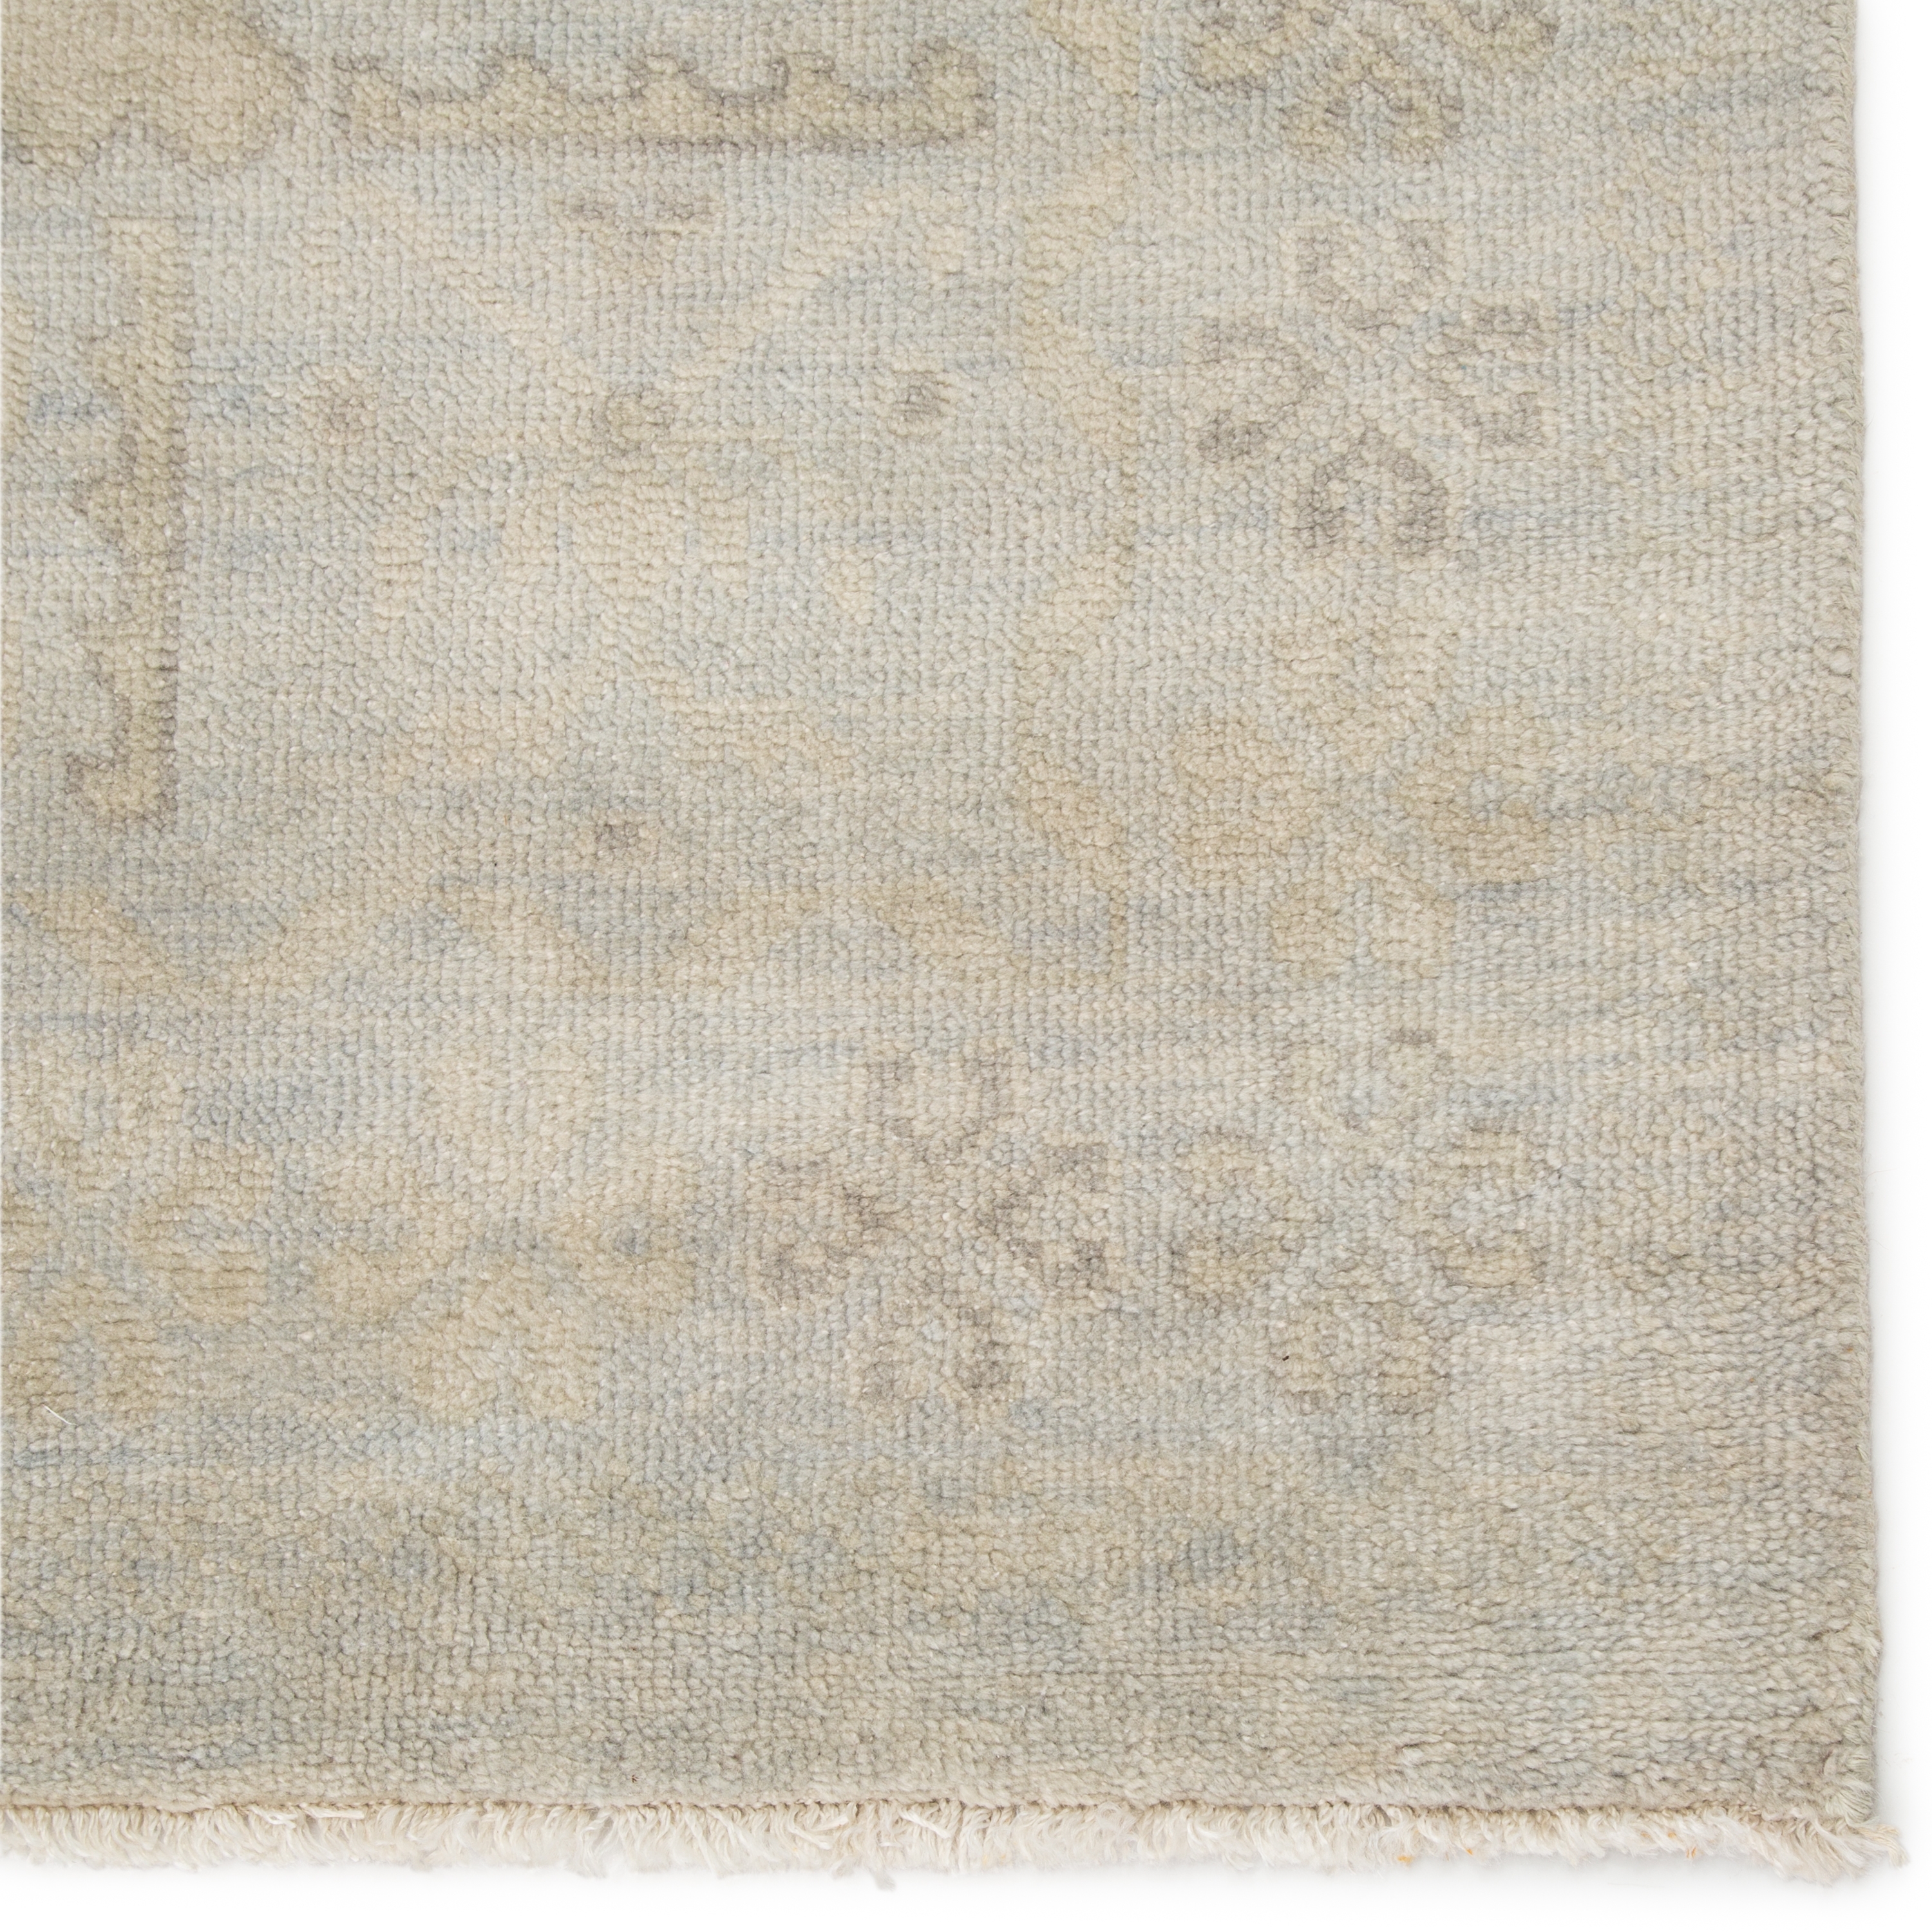 Chival Hand-Knotted Tribal Light Gray/ Beige Area Rug (8'X11') - Image 3